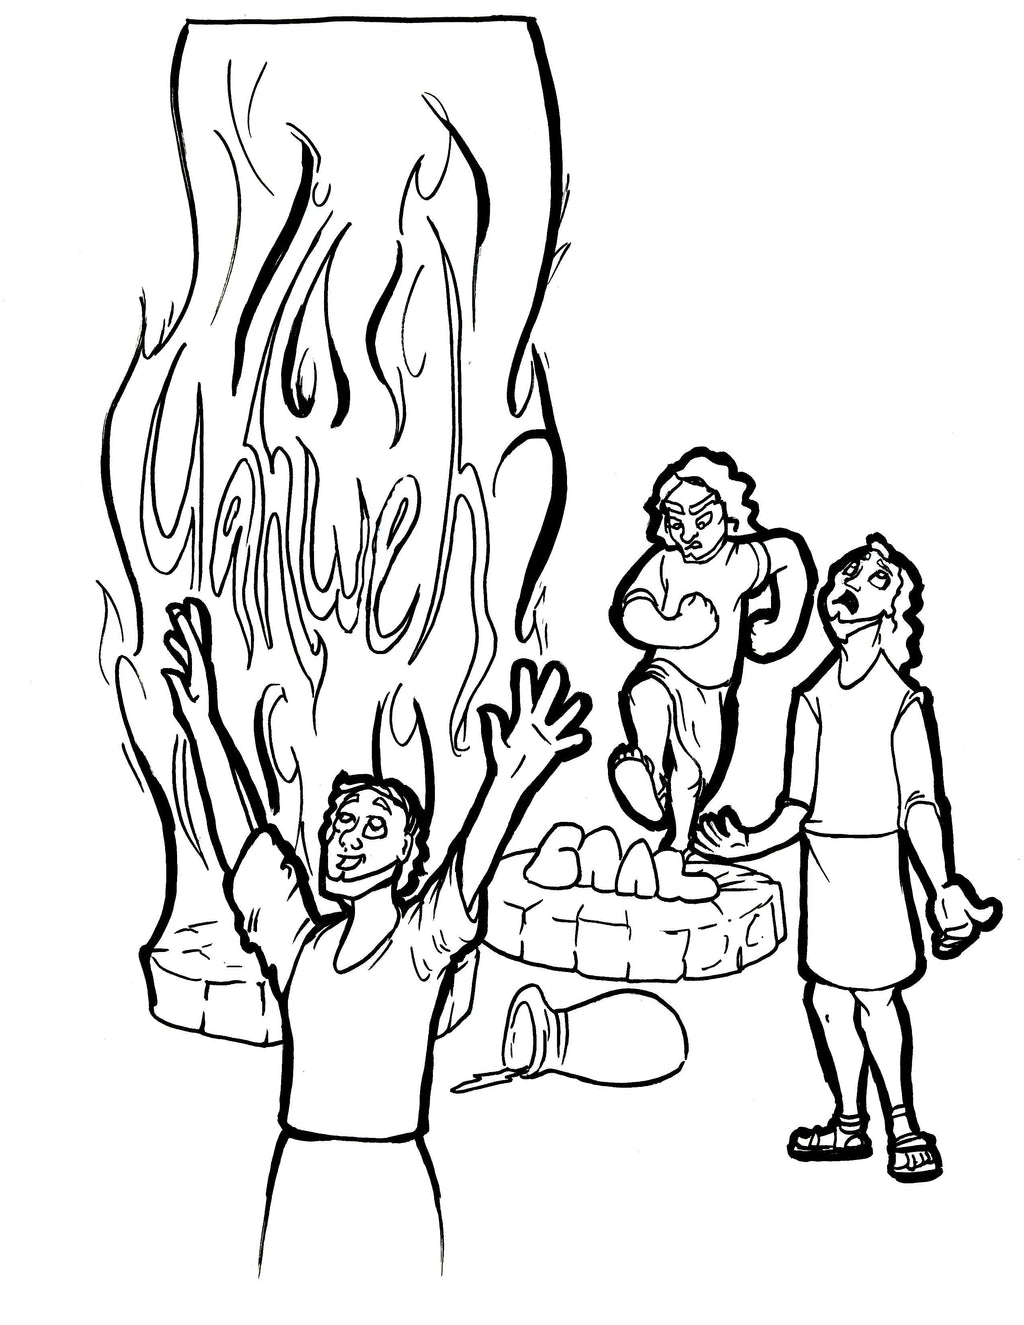 Elijah and prophets of baal coloring page